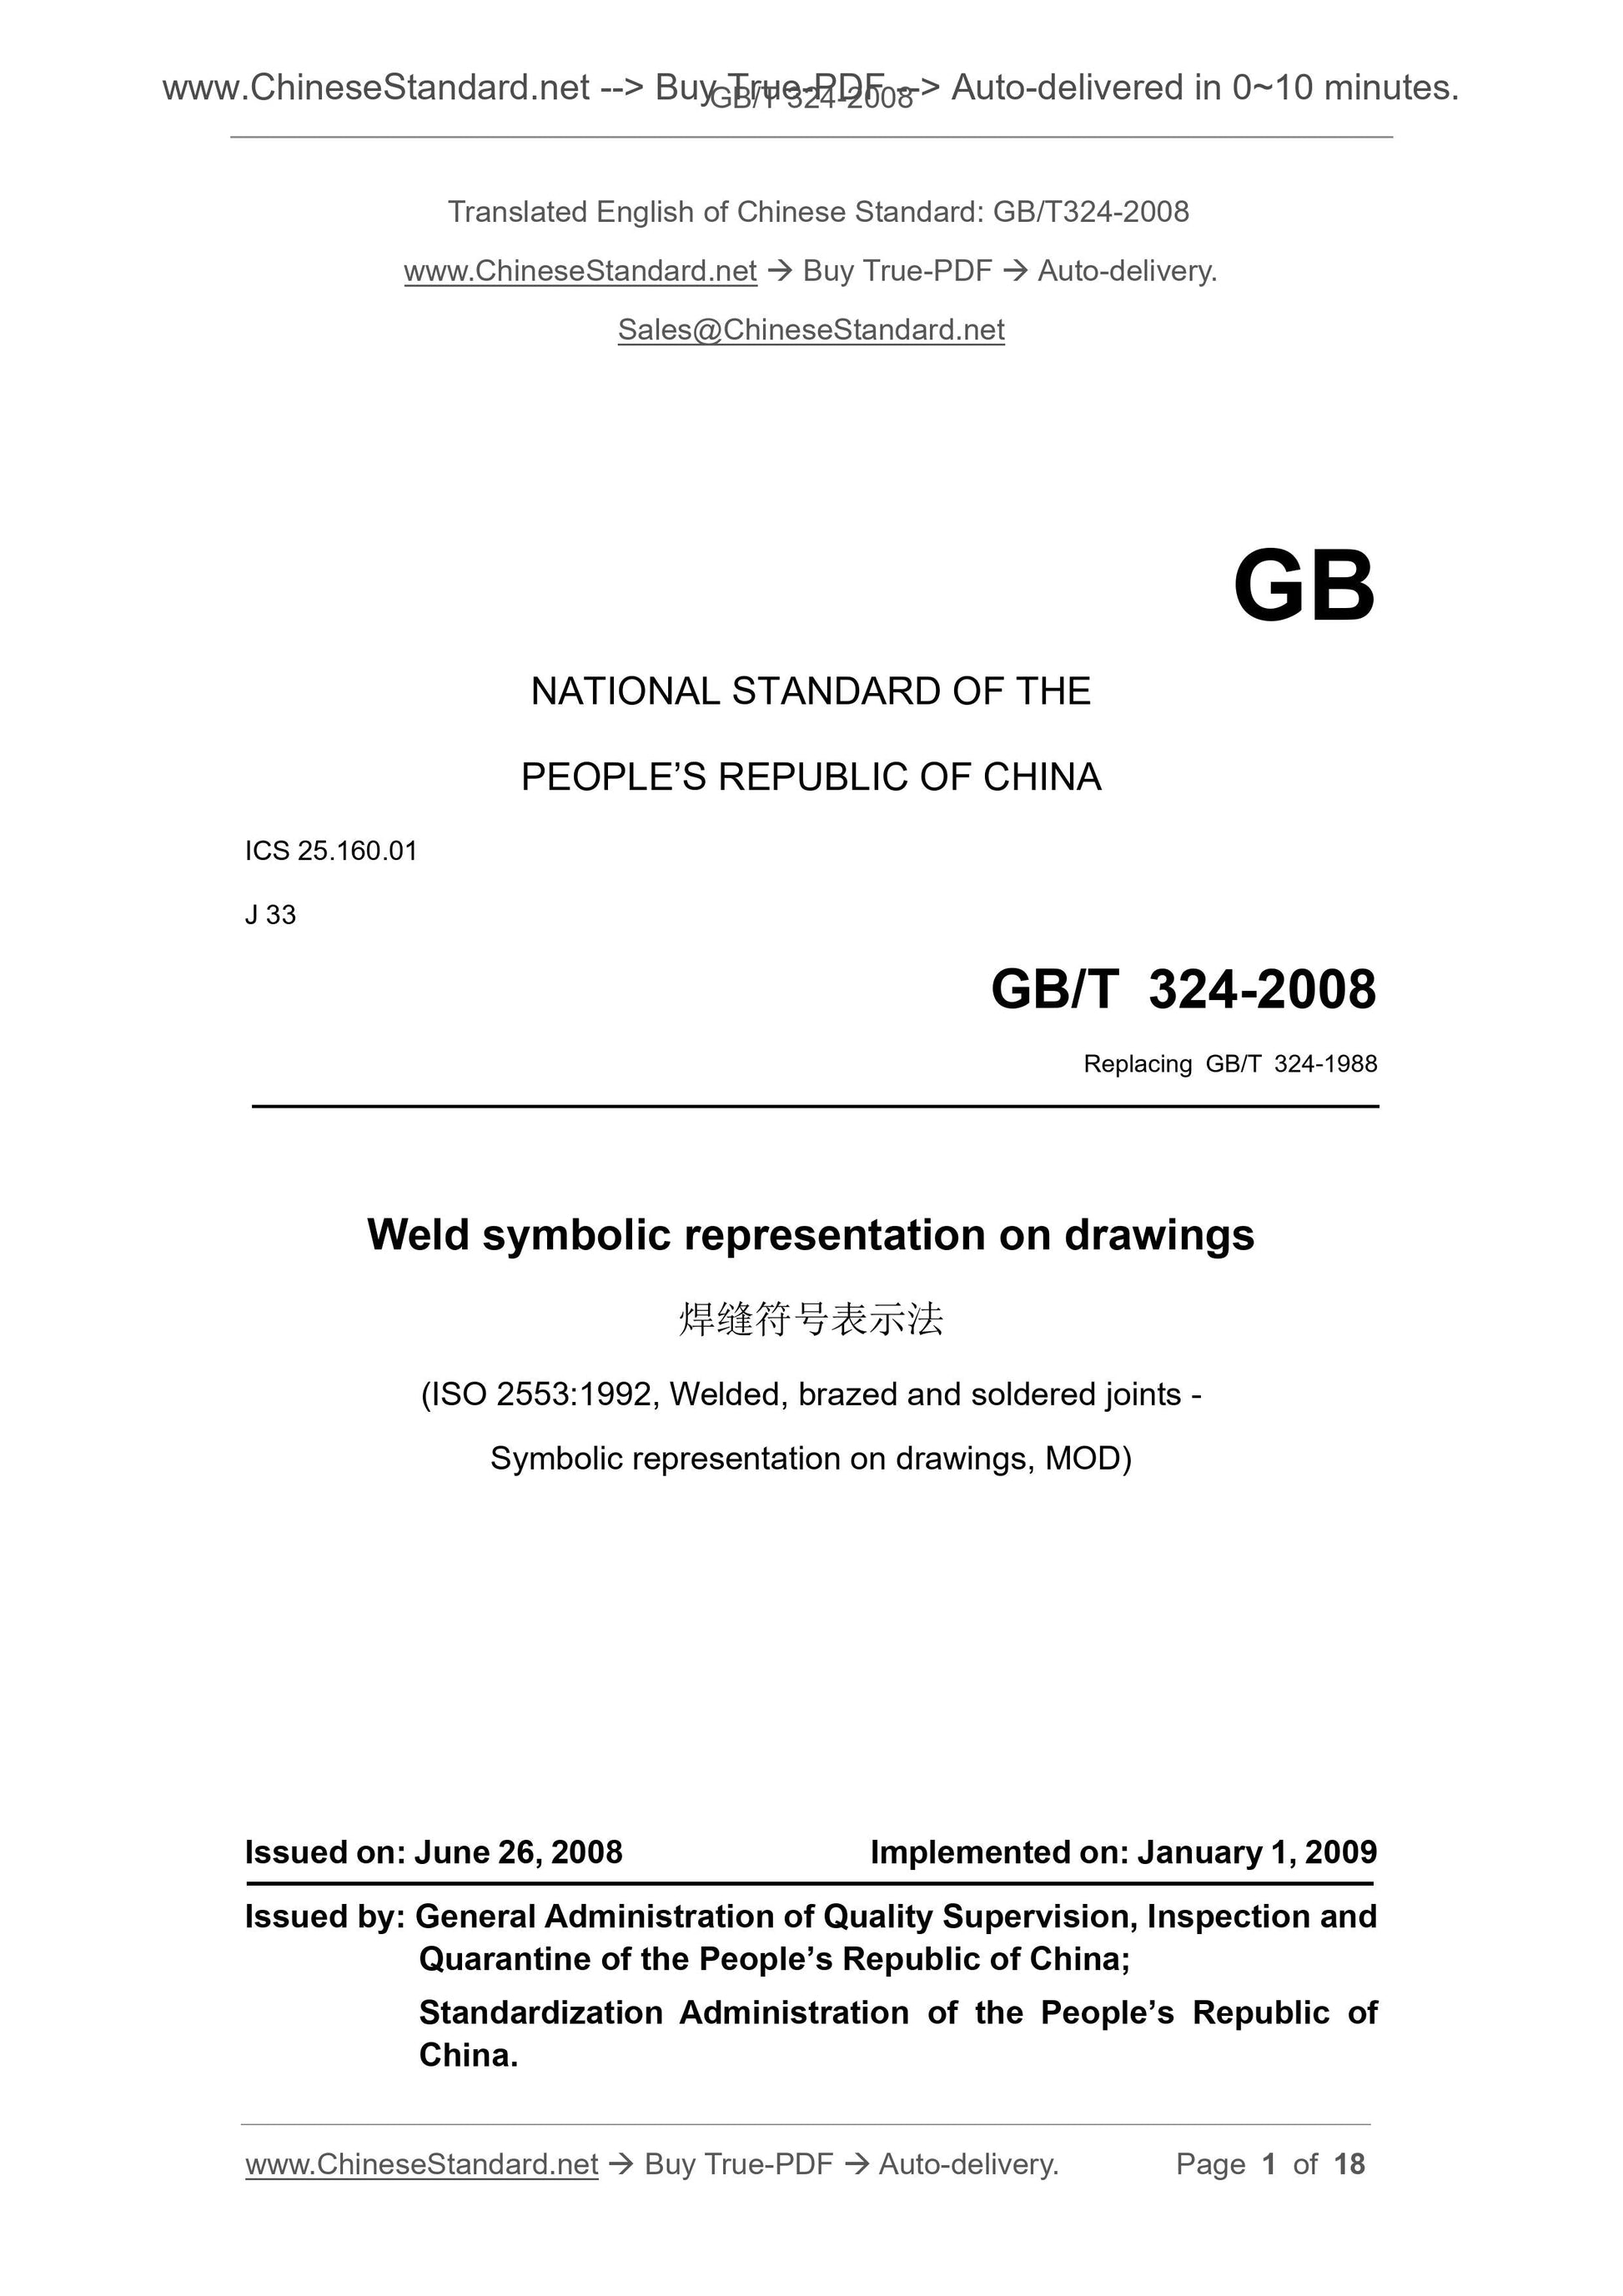 GB/T 324-2008 Page 1